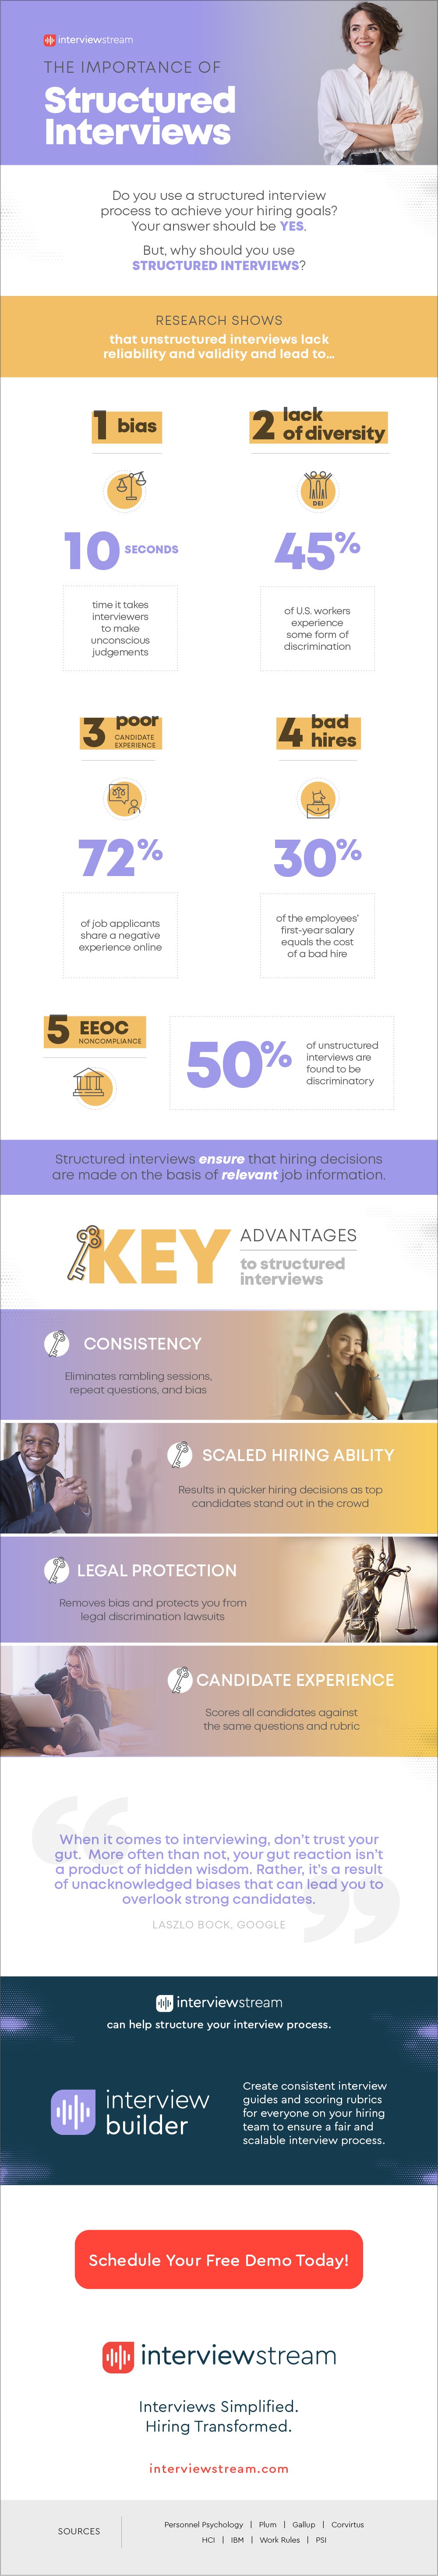 Infographic showing the benefits of a structured interviewing and hiring process.